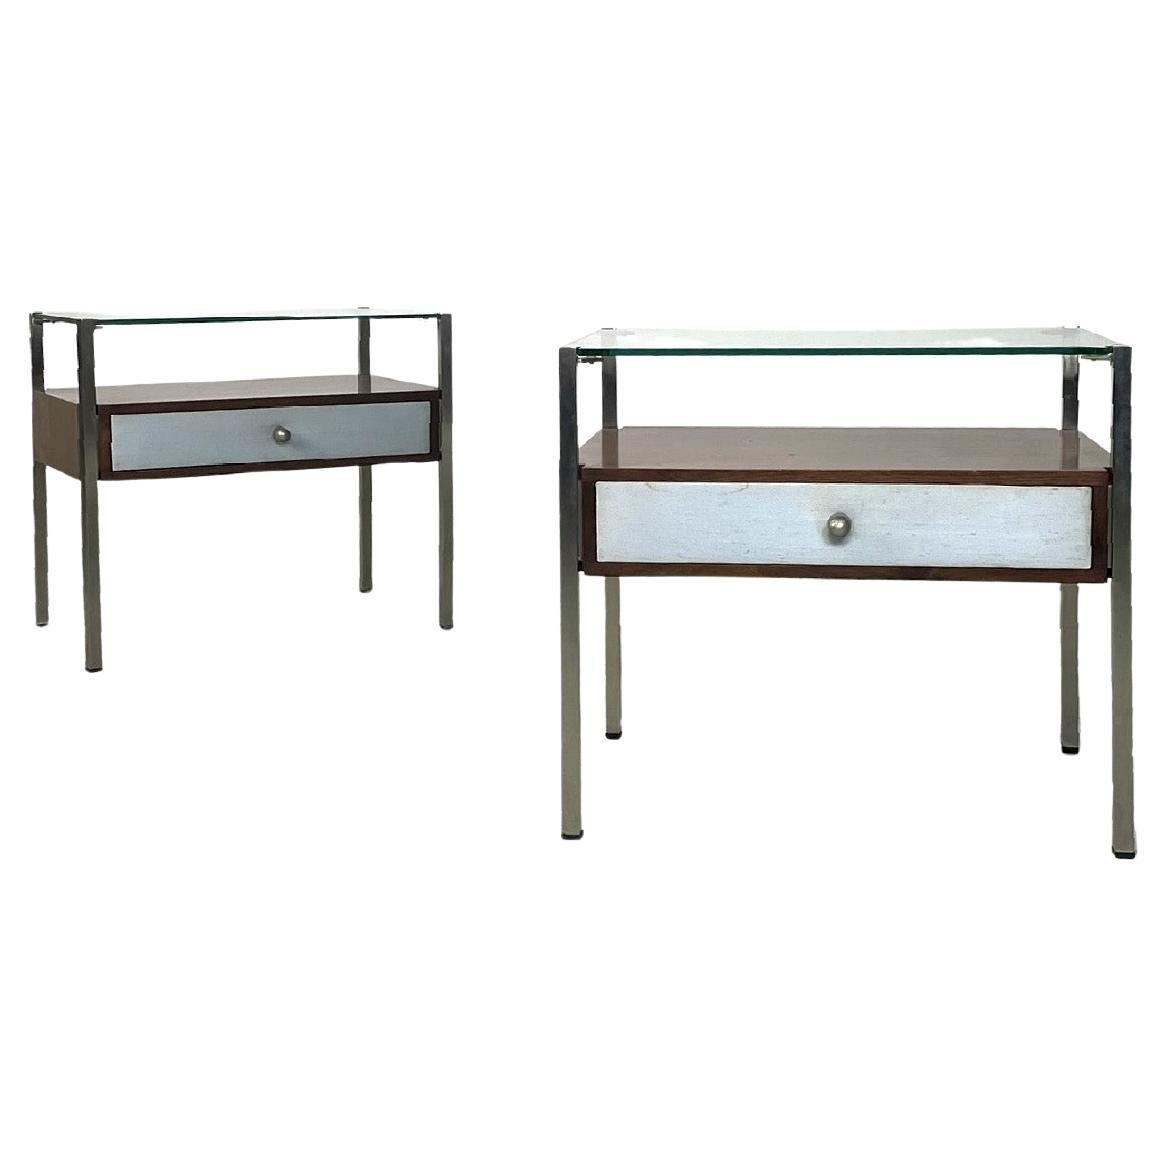 Italian modern glass metal wood and light blue fabric bedside tables, 1970s For Sale